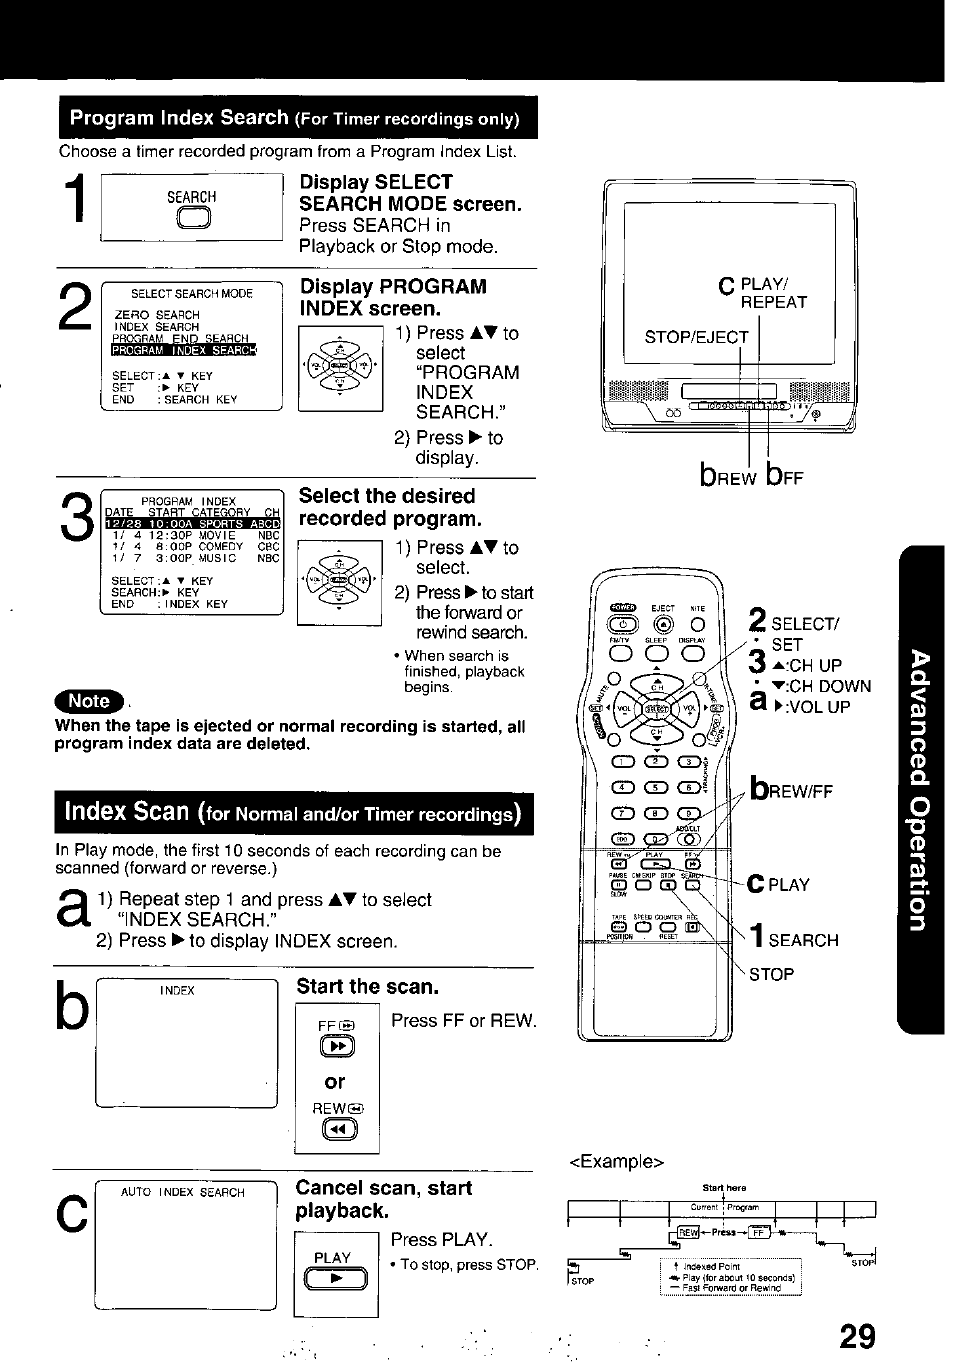 I qjgpigy select search mode screen, Display program index screen, Select the desired recorded program | Index sesn (for normal and/or timer recordings), Start the scan, Cancel scan, start playback | Panasonic PV C2020 User Manual | Page 29 / 52